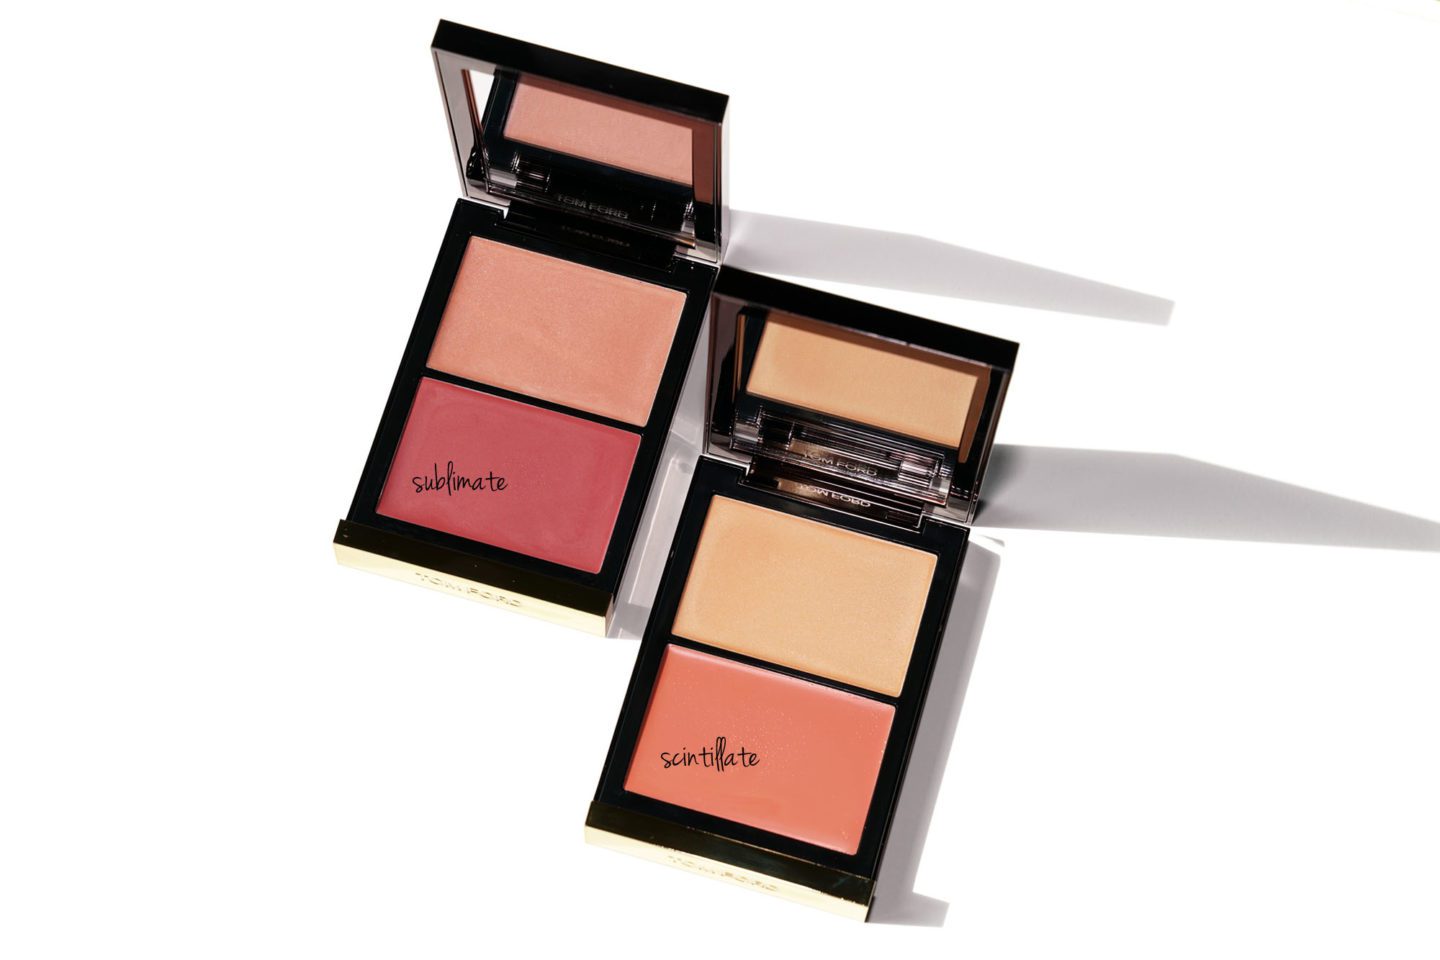 Tom Ford Beauty Shade Illuminate Cheeks Sublimate and Scintillate | The Beauty Look Book